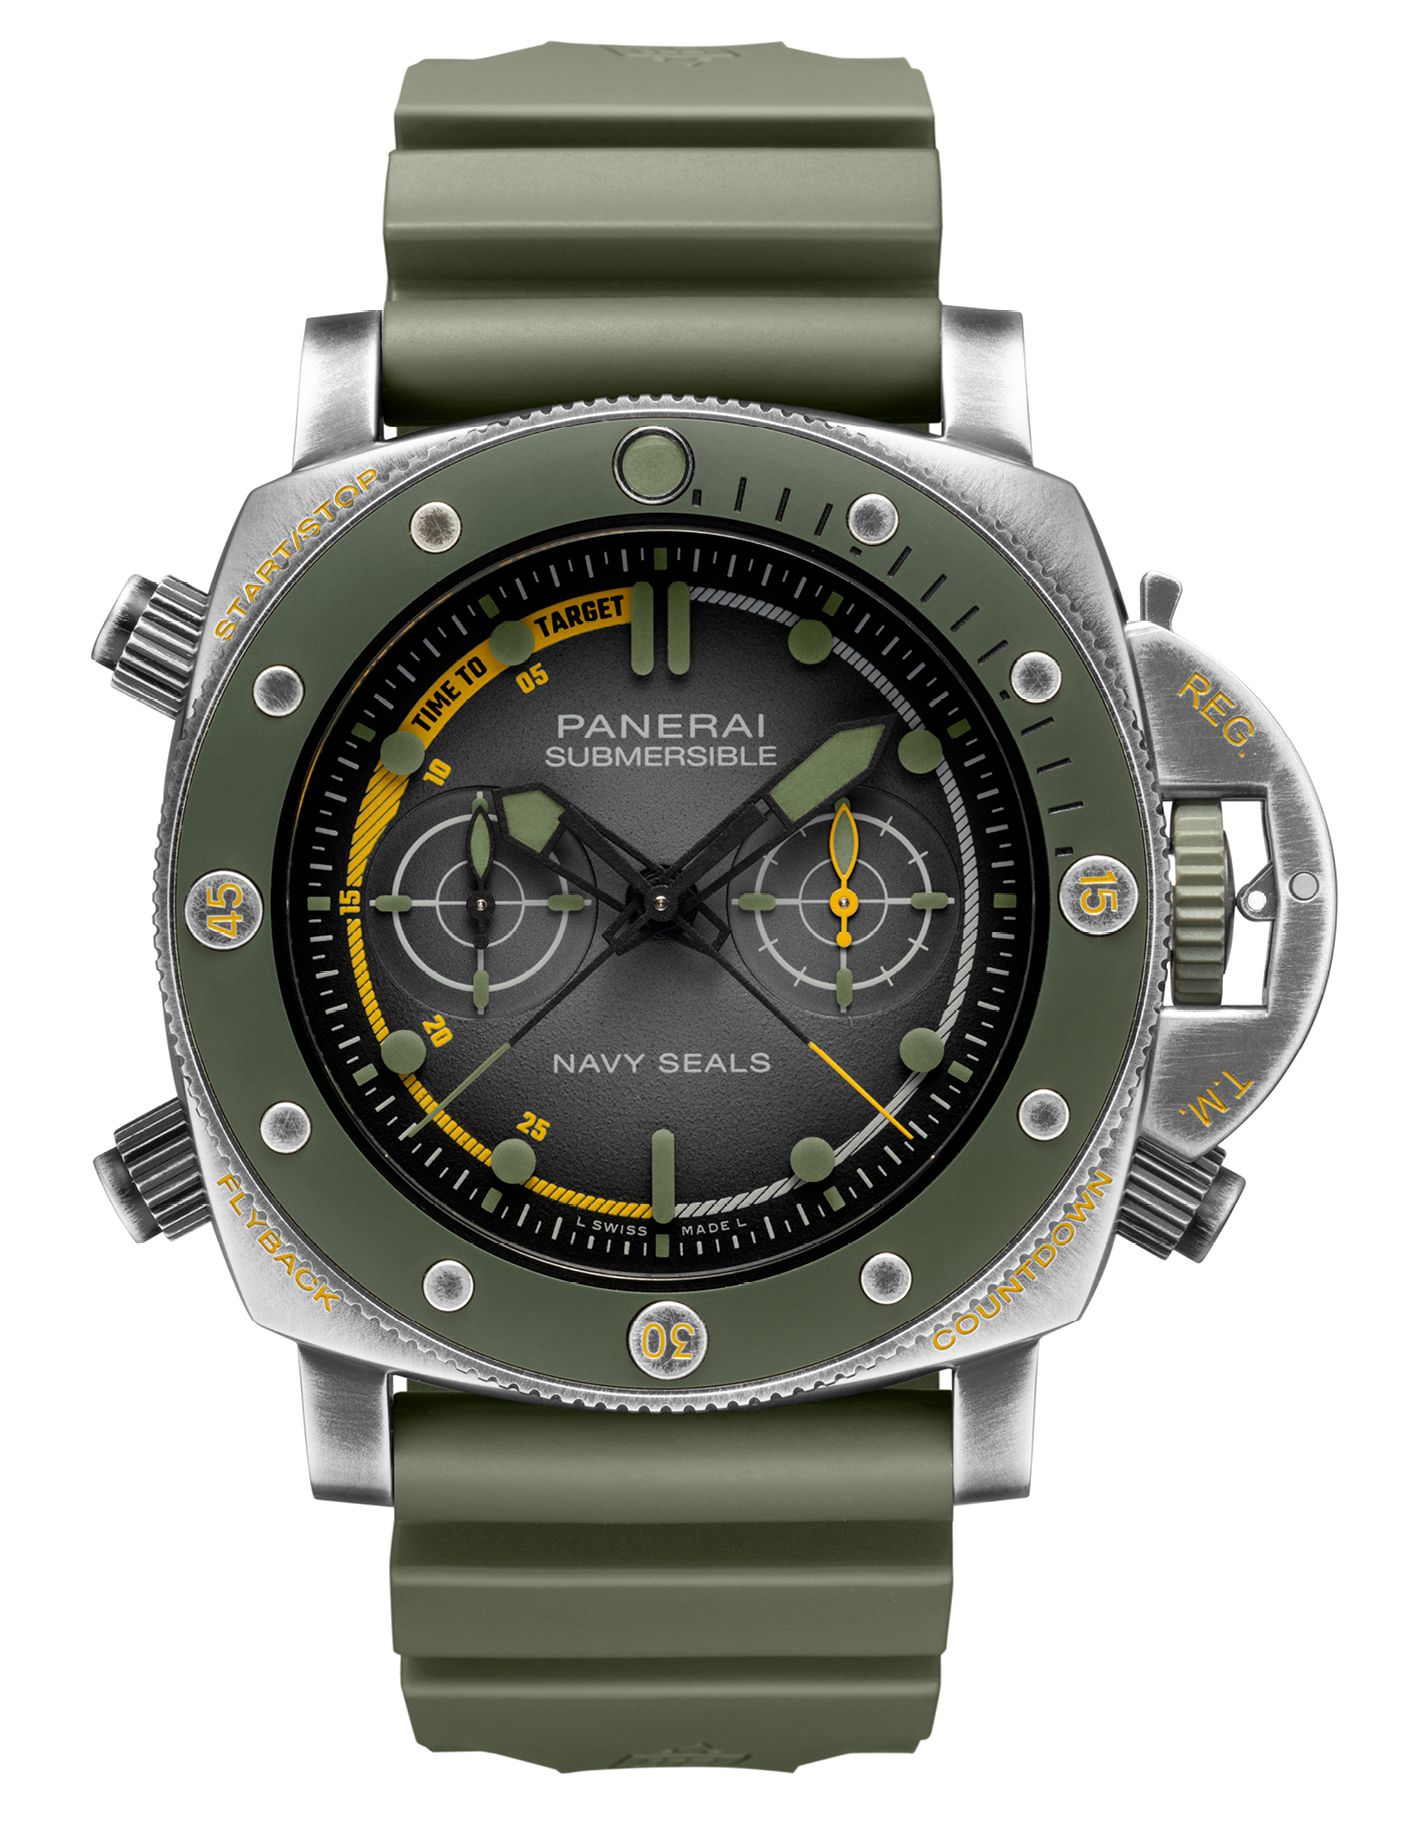 Panerai’s Navy SEALs Submersible Experience Edition